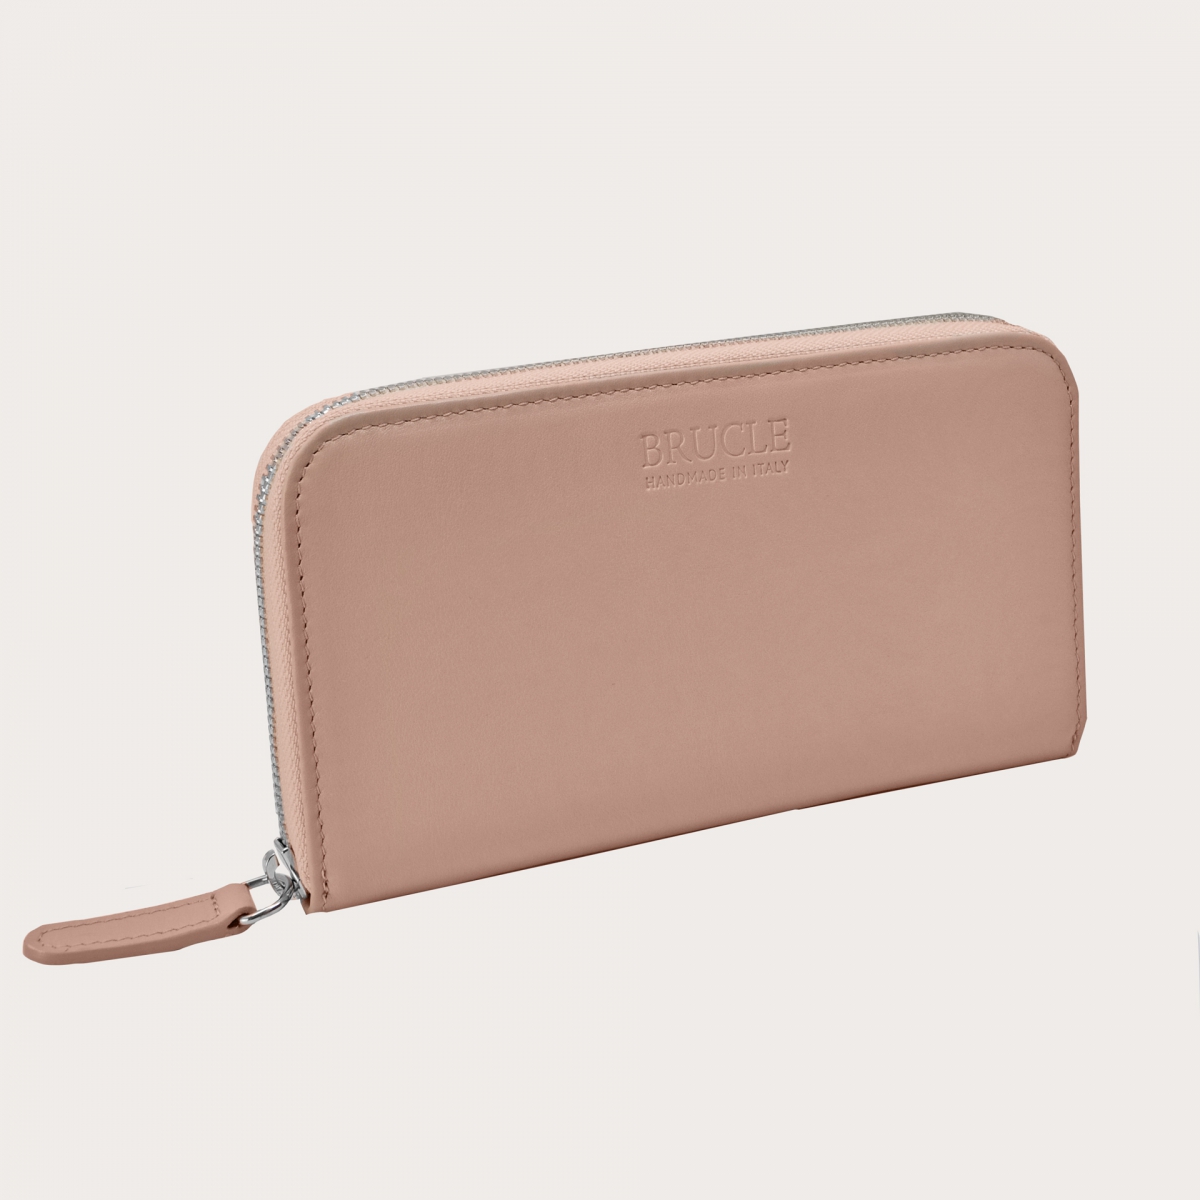 BRUCLE Refined women's wallet in leather with zip, powder color